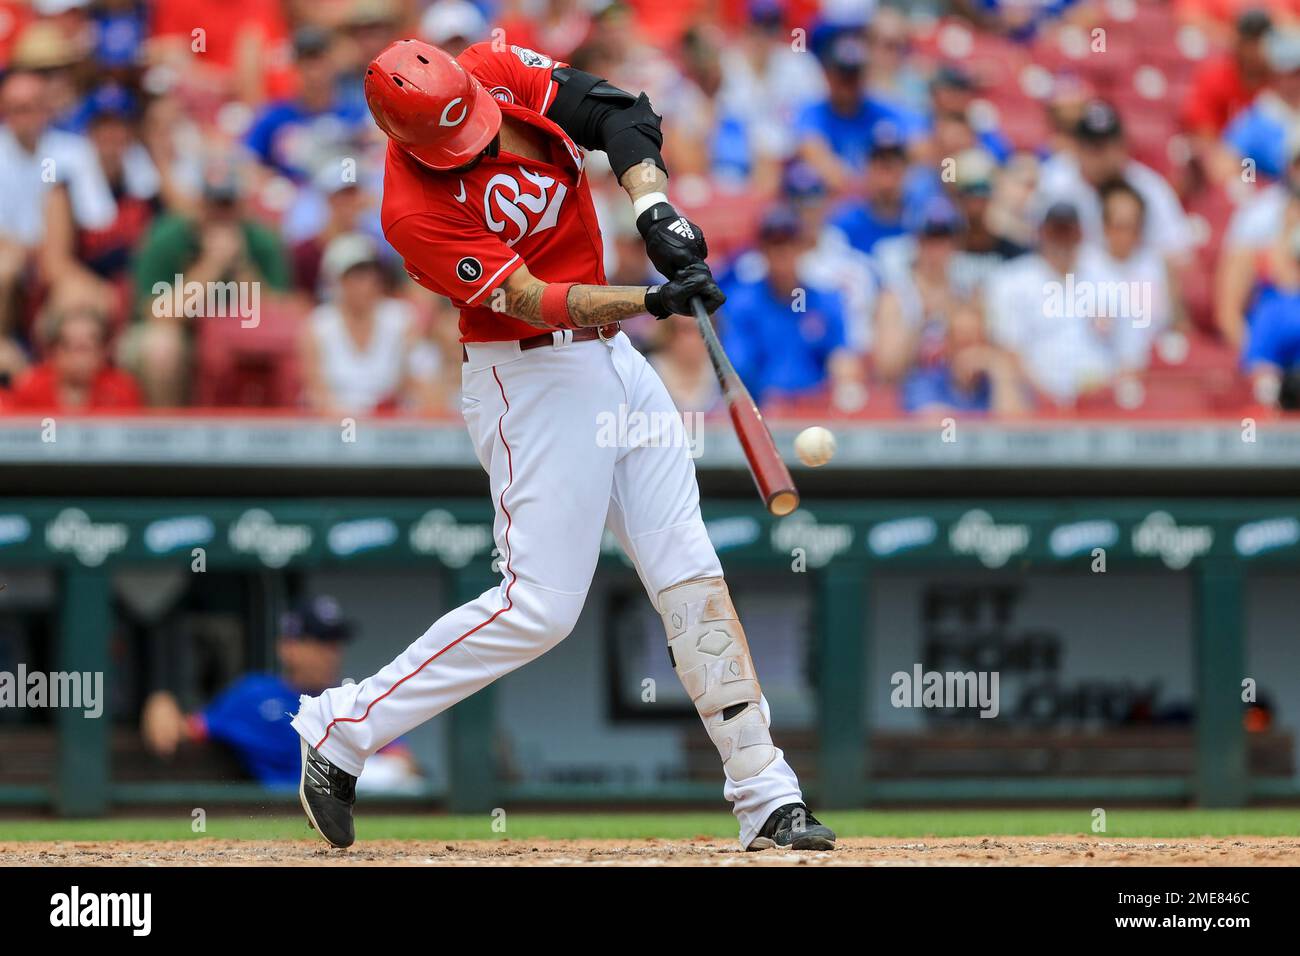 GALLERY: Chicago White Sox at Cincinnati Reds, July 2